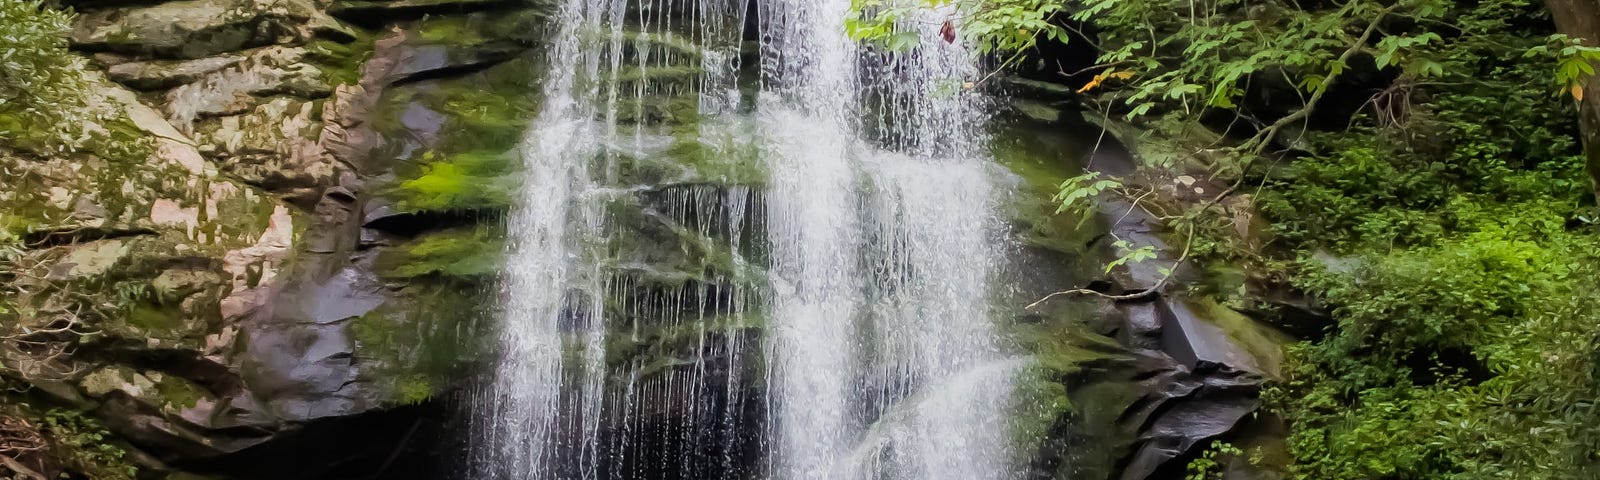 Image of a waterfall cascading down mossy rocks in the forest.